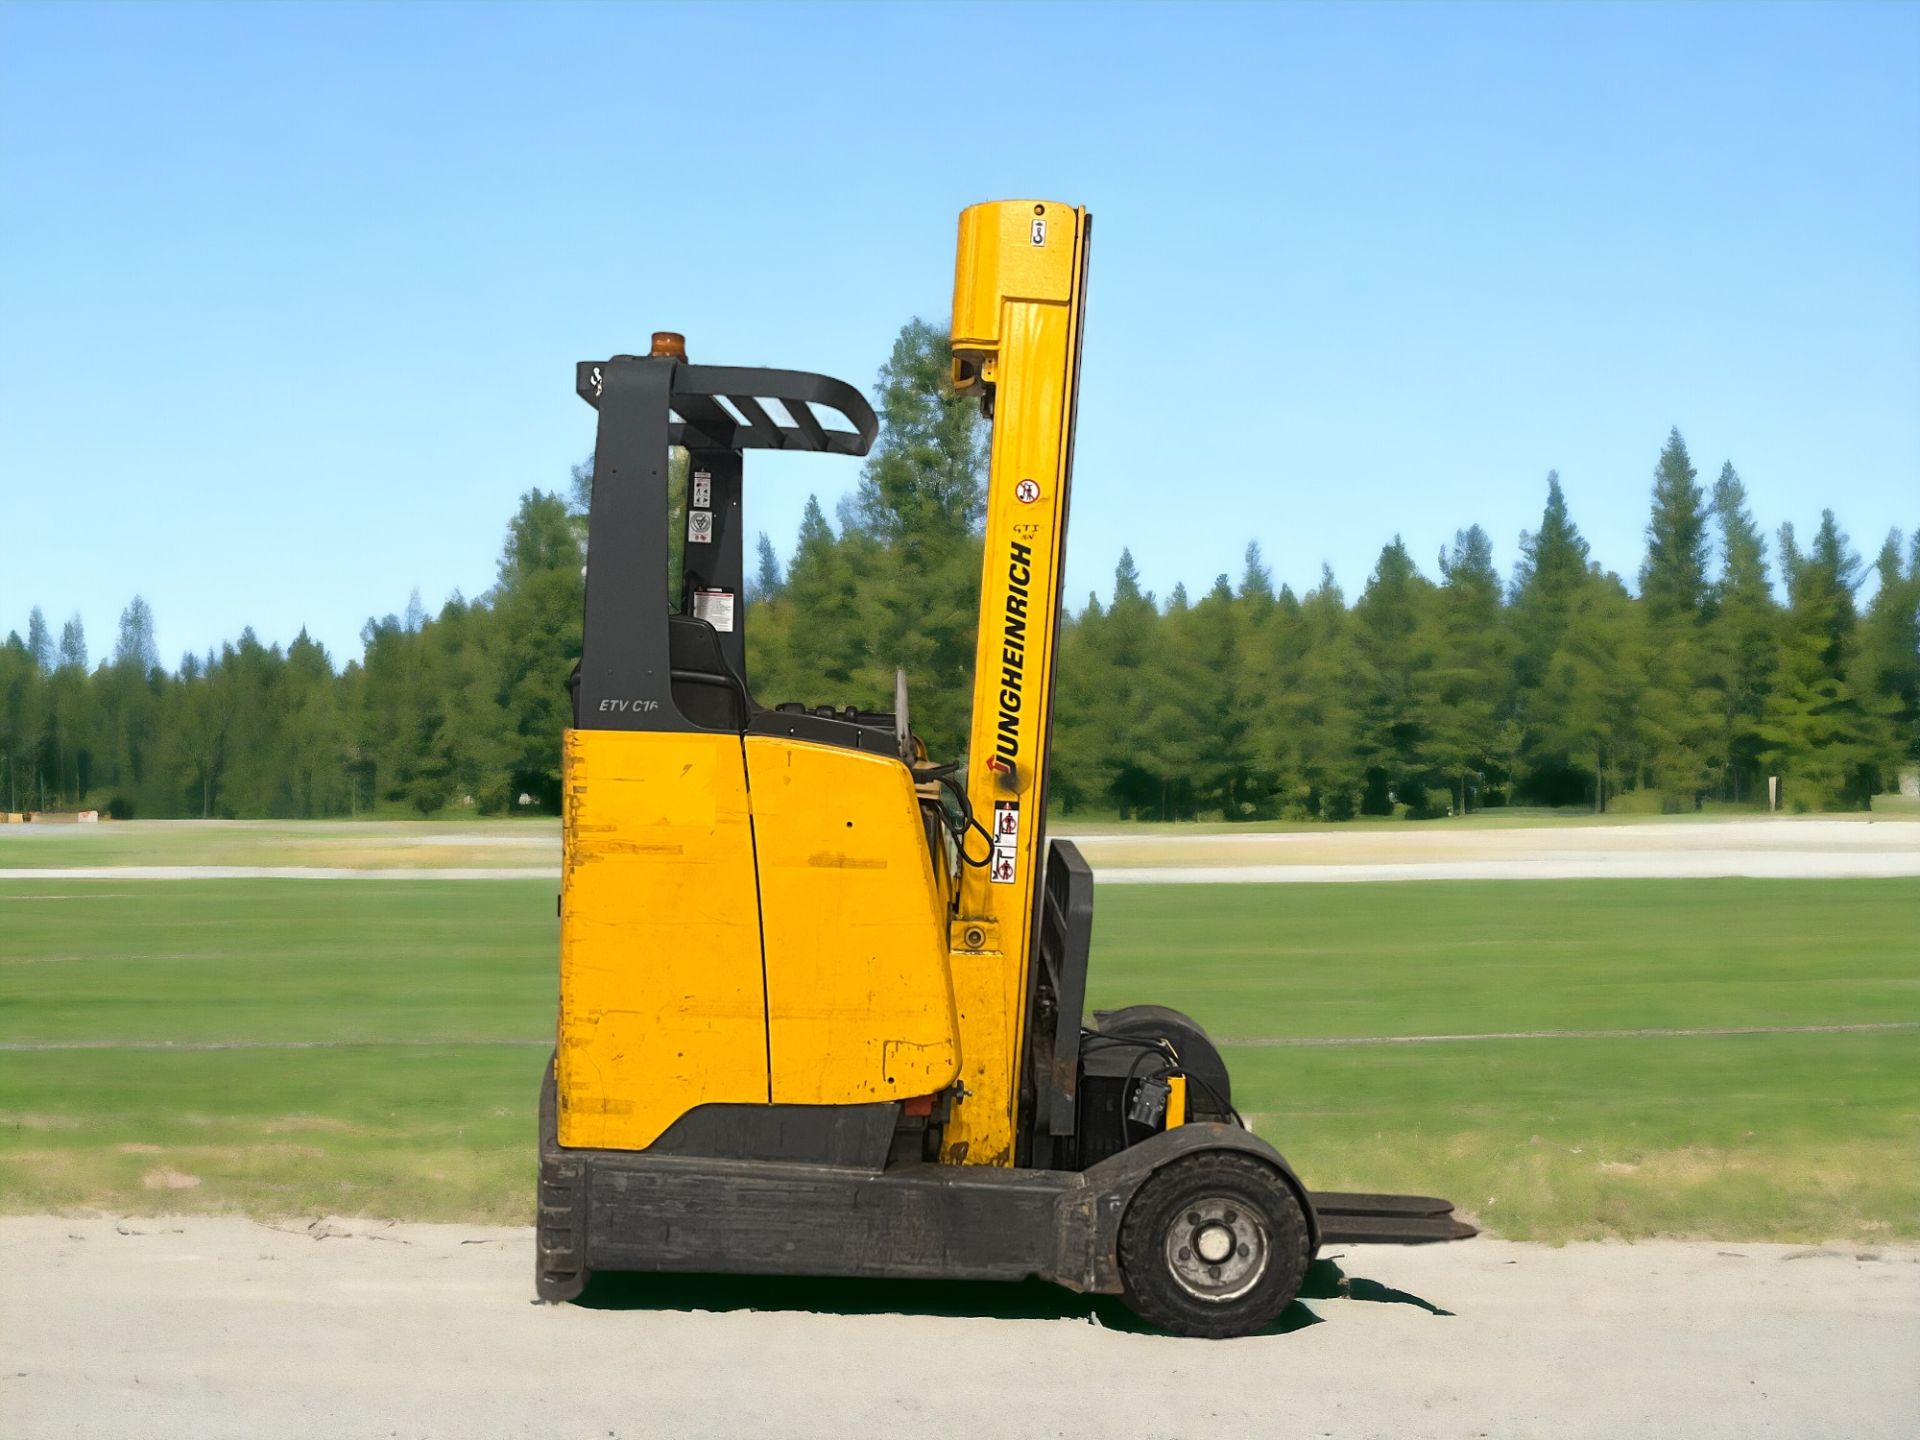 JUNGHEINRICH REACH TRUCK ETVC 16: POWERFUL ELECTRIC WORKHORSE WITH LOW HOURS **(INCLUDES CHARGER)**